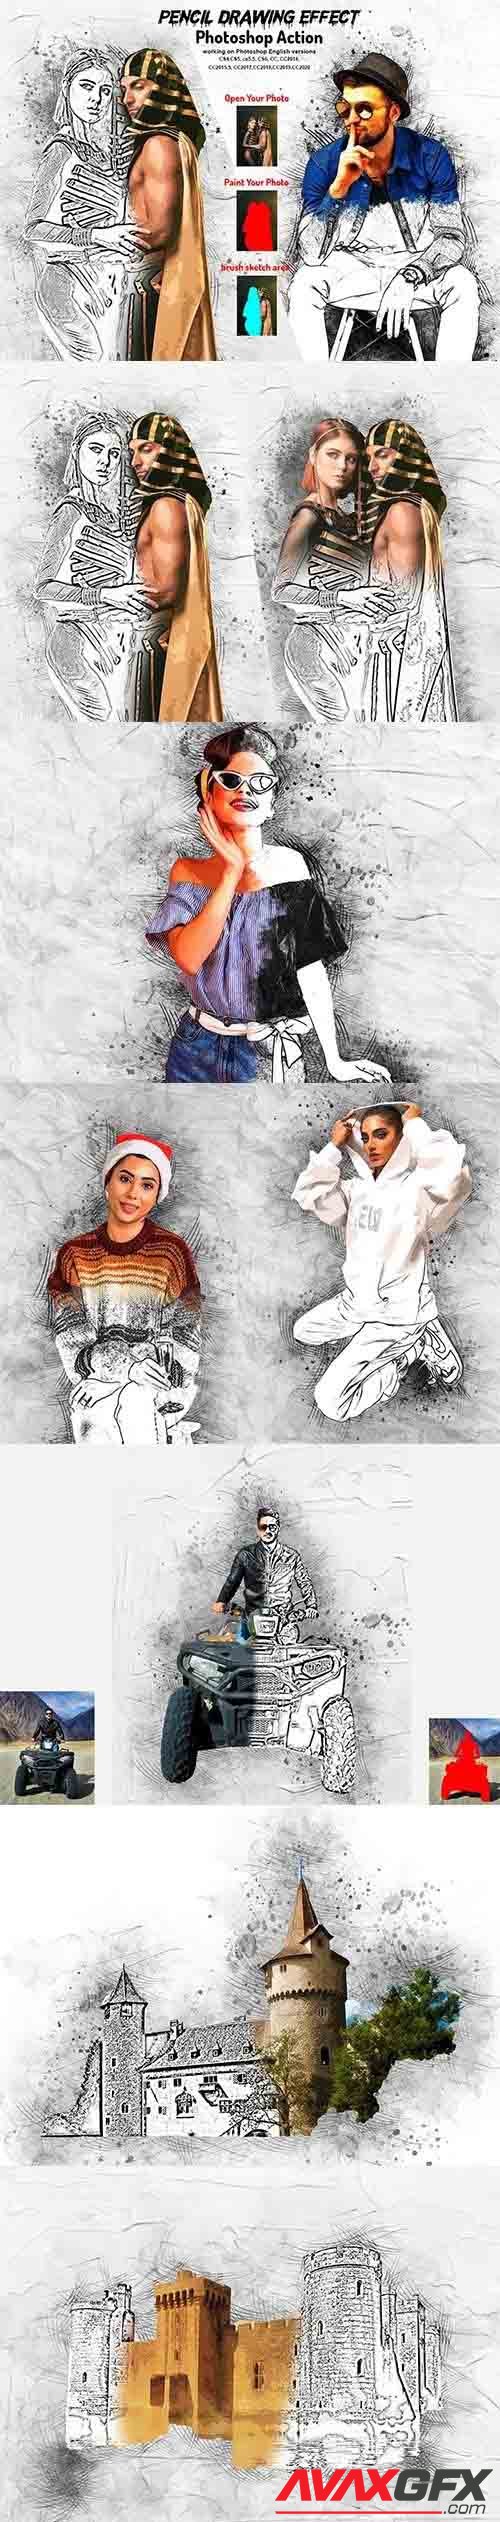 CreativeMarket - Pencil Drawing Effect PS Action 5891890